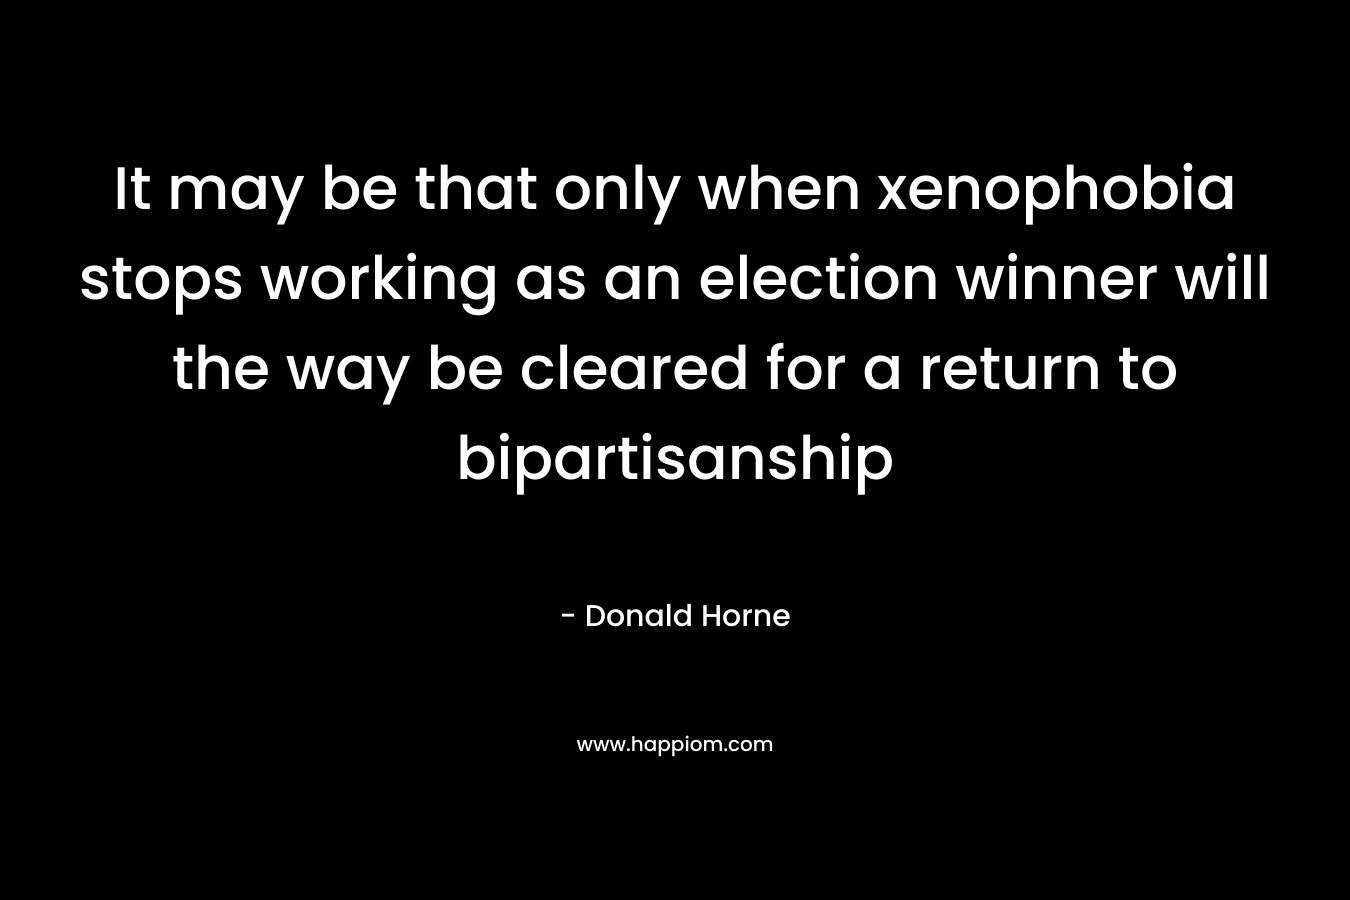 It may be that only when xenophobia stops working as an election winner will the way be cleared for a return to bipartisanship – Donald Horne